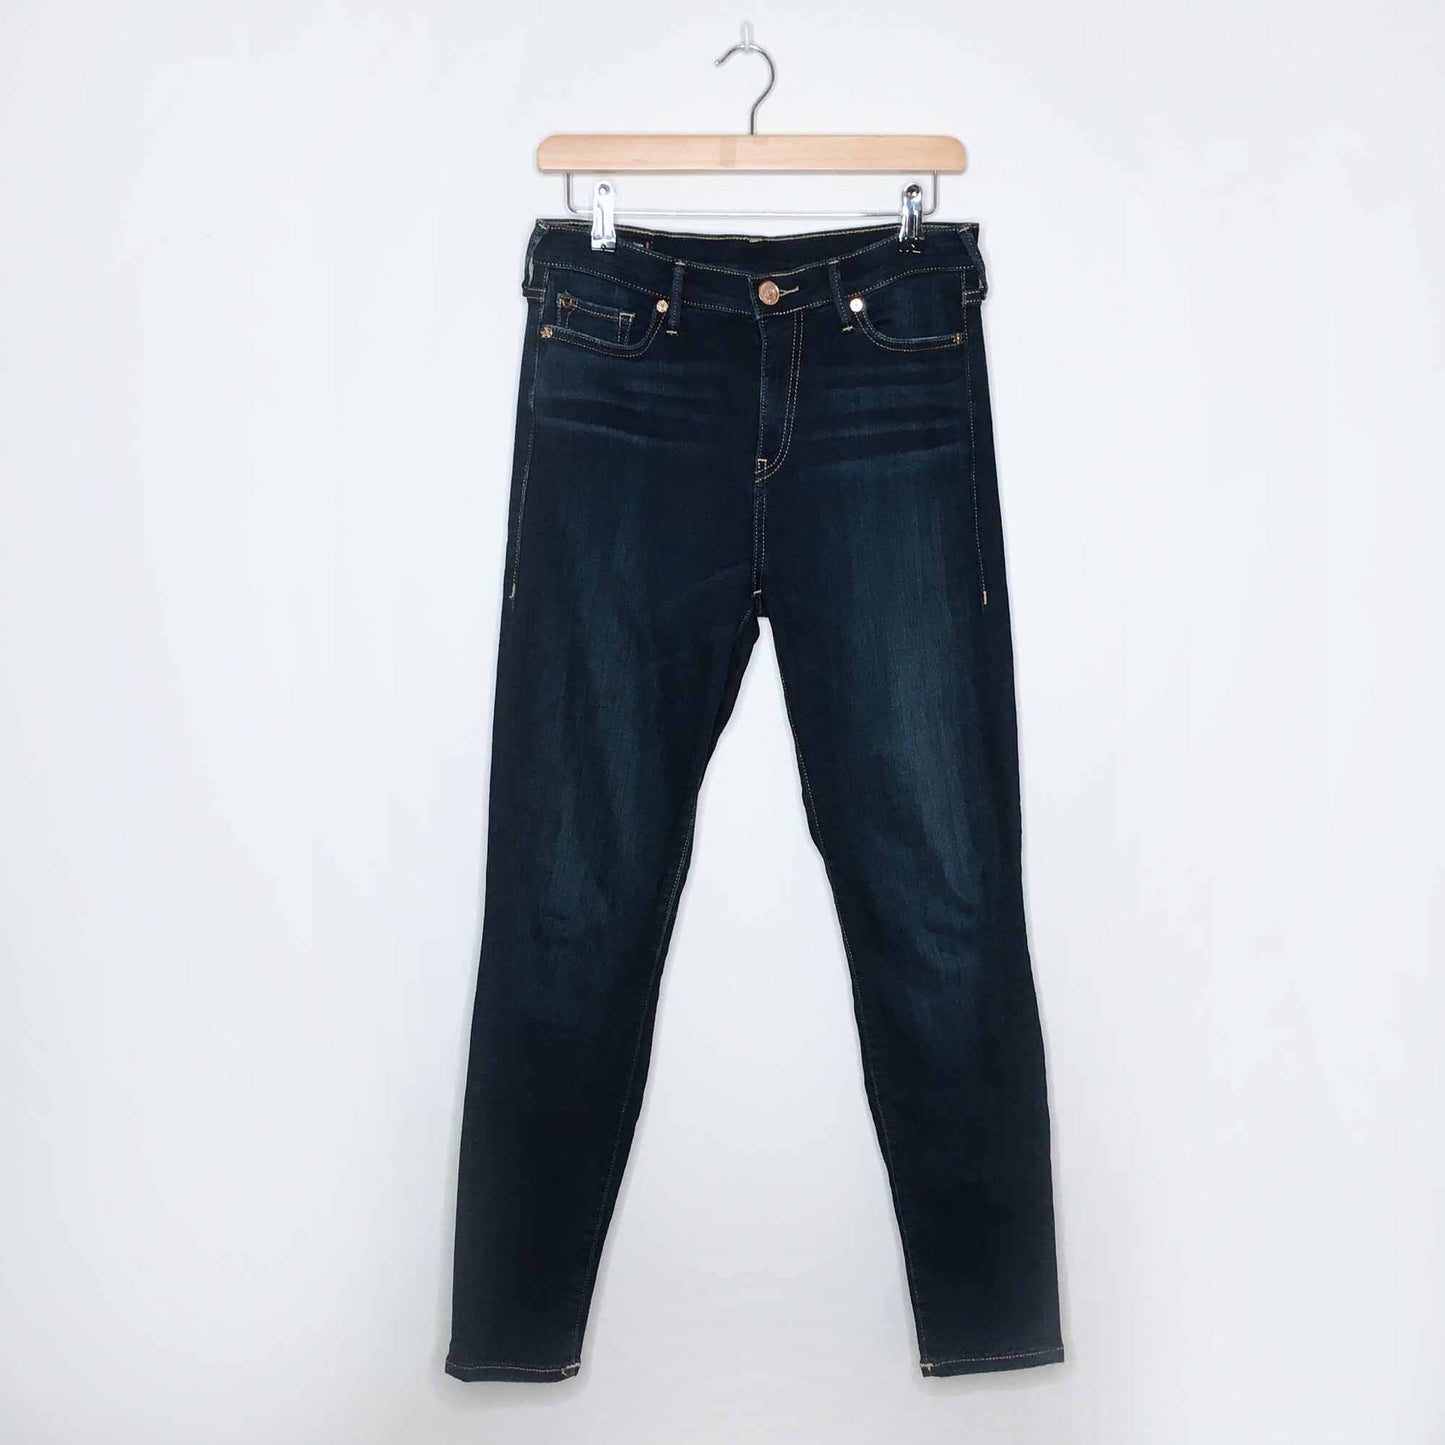 True Religion high rise super skinny jeans - size 29